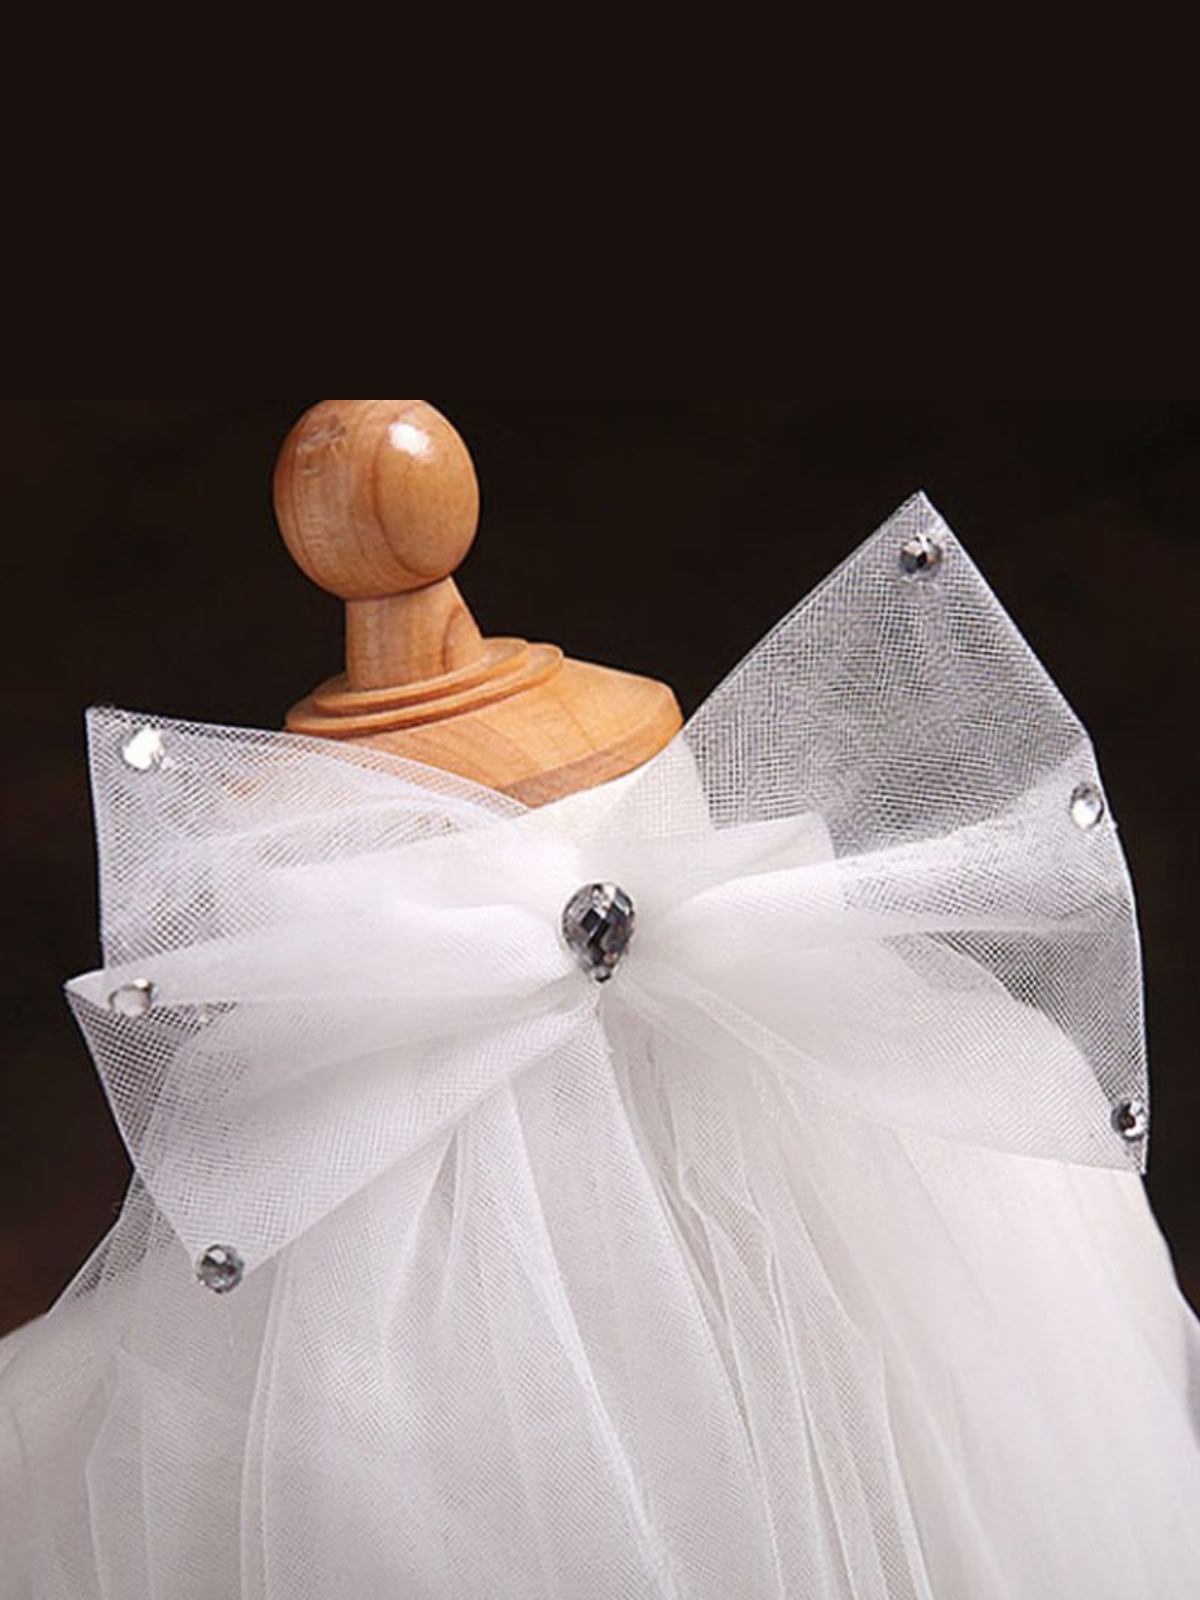 Girls Formal Accessories | Flower Girl Bejeweled Bow White Veil Clip